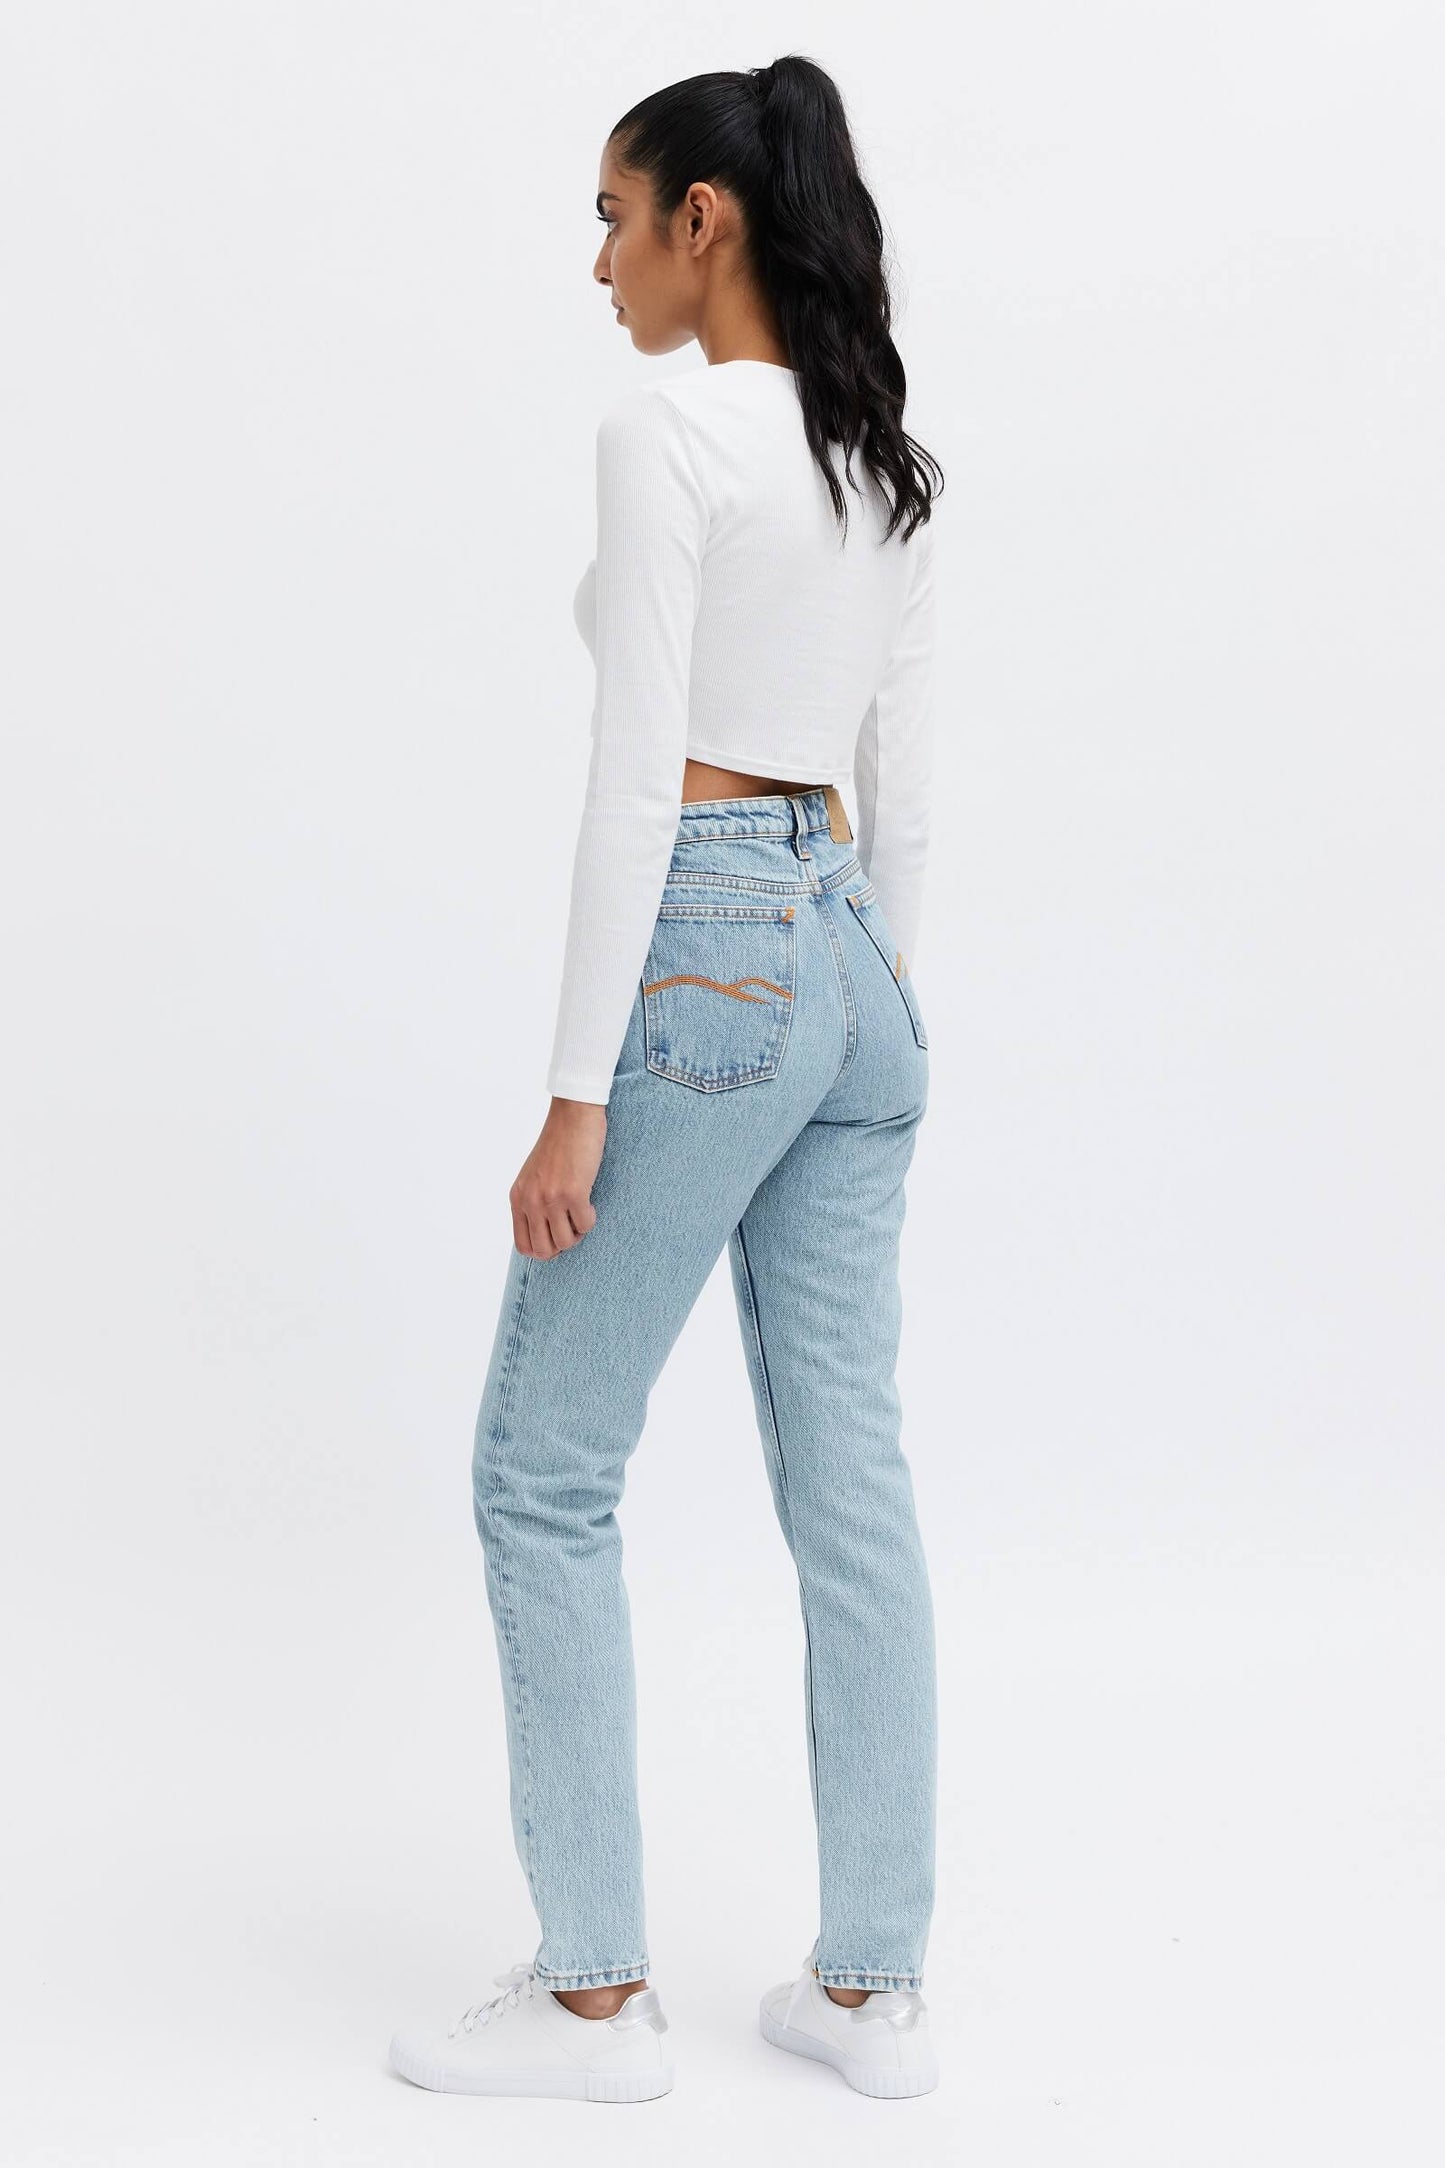 Organic jeans - Women's tapered fit - High rise